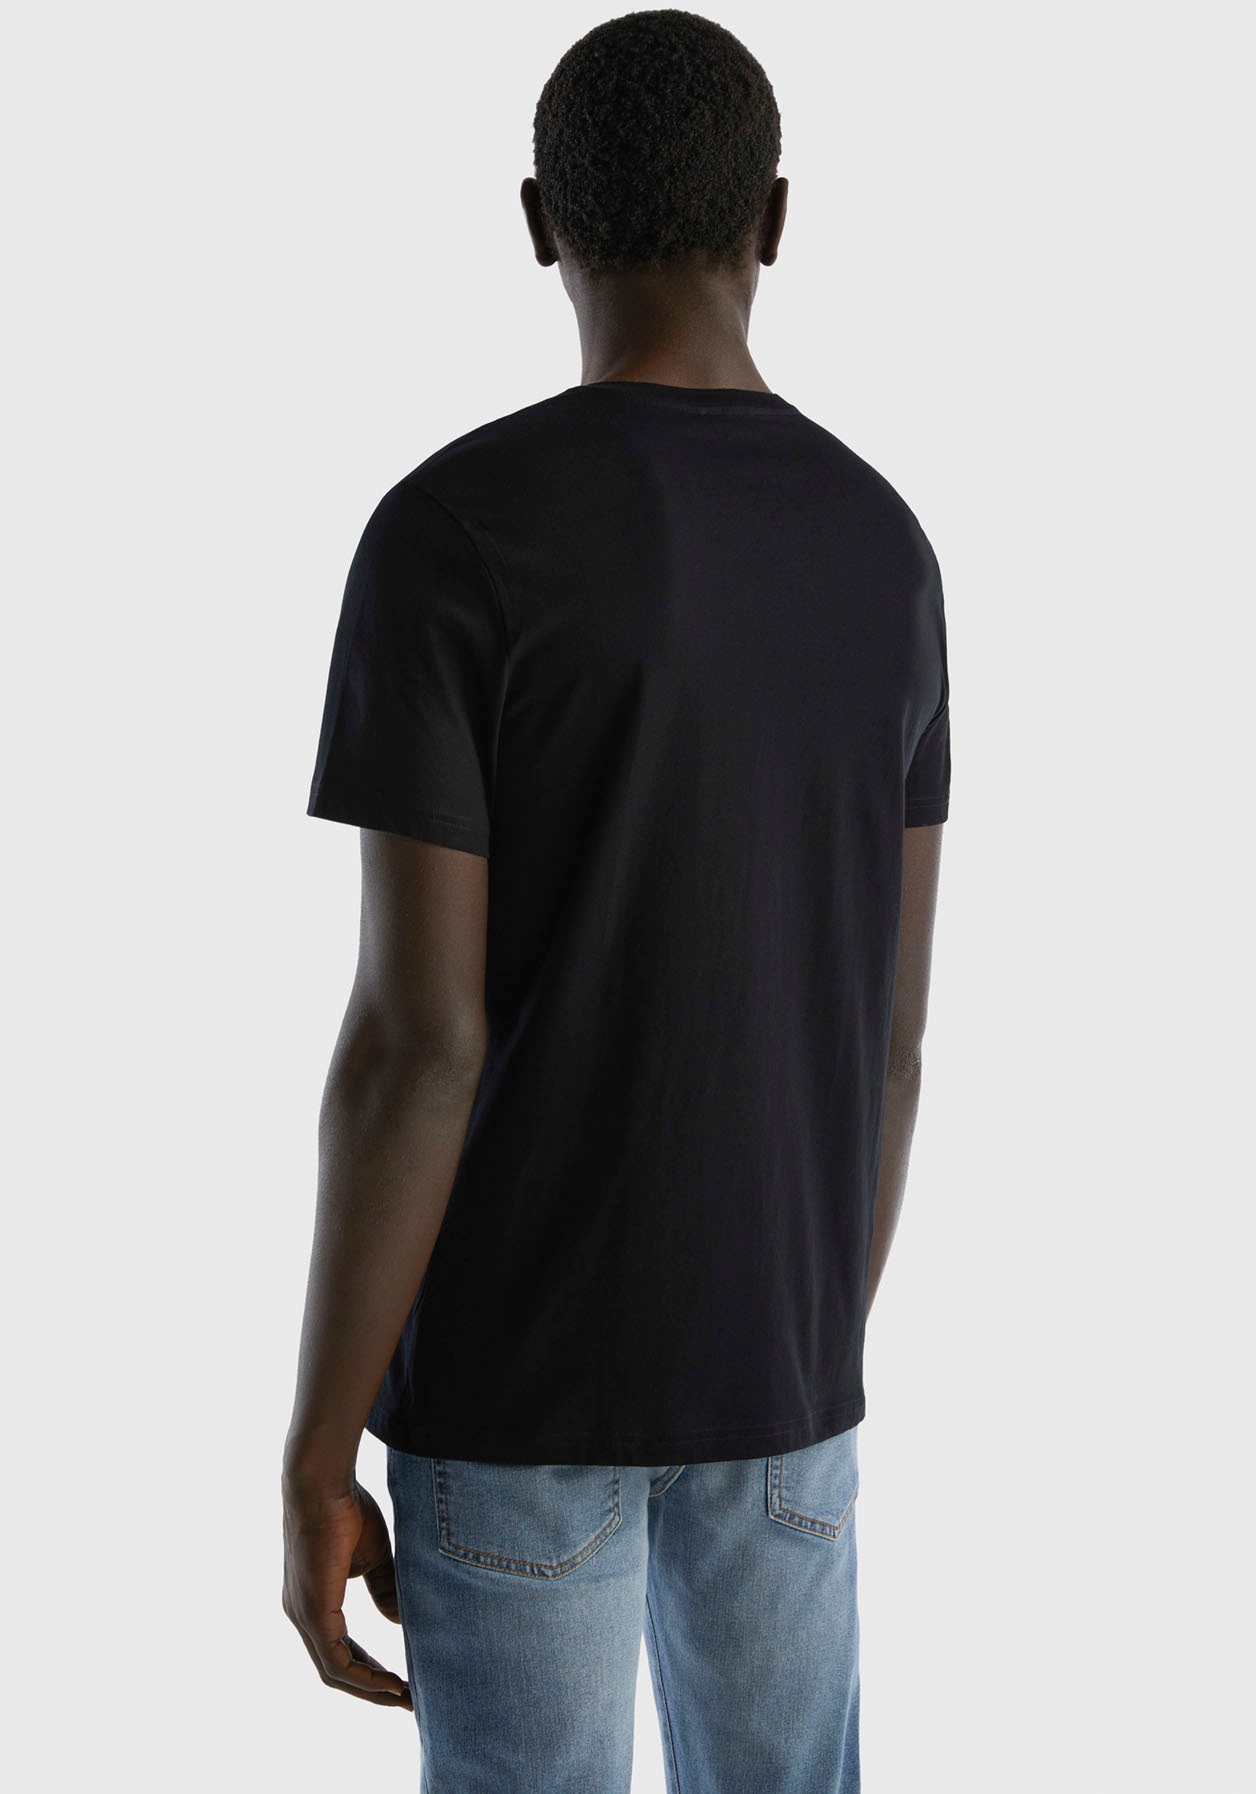 United Colors of Benetton in Basic-Form OTTO shoppen online bei cleaner T-Shirt